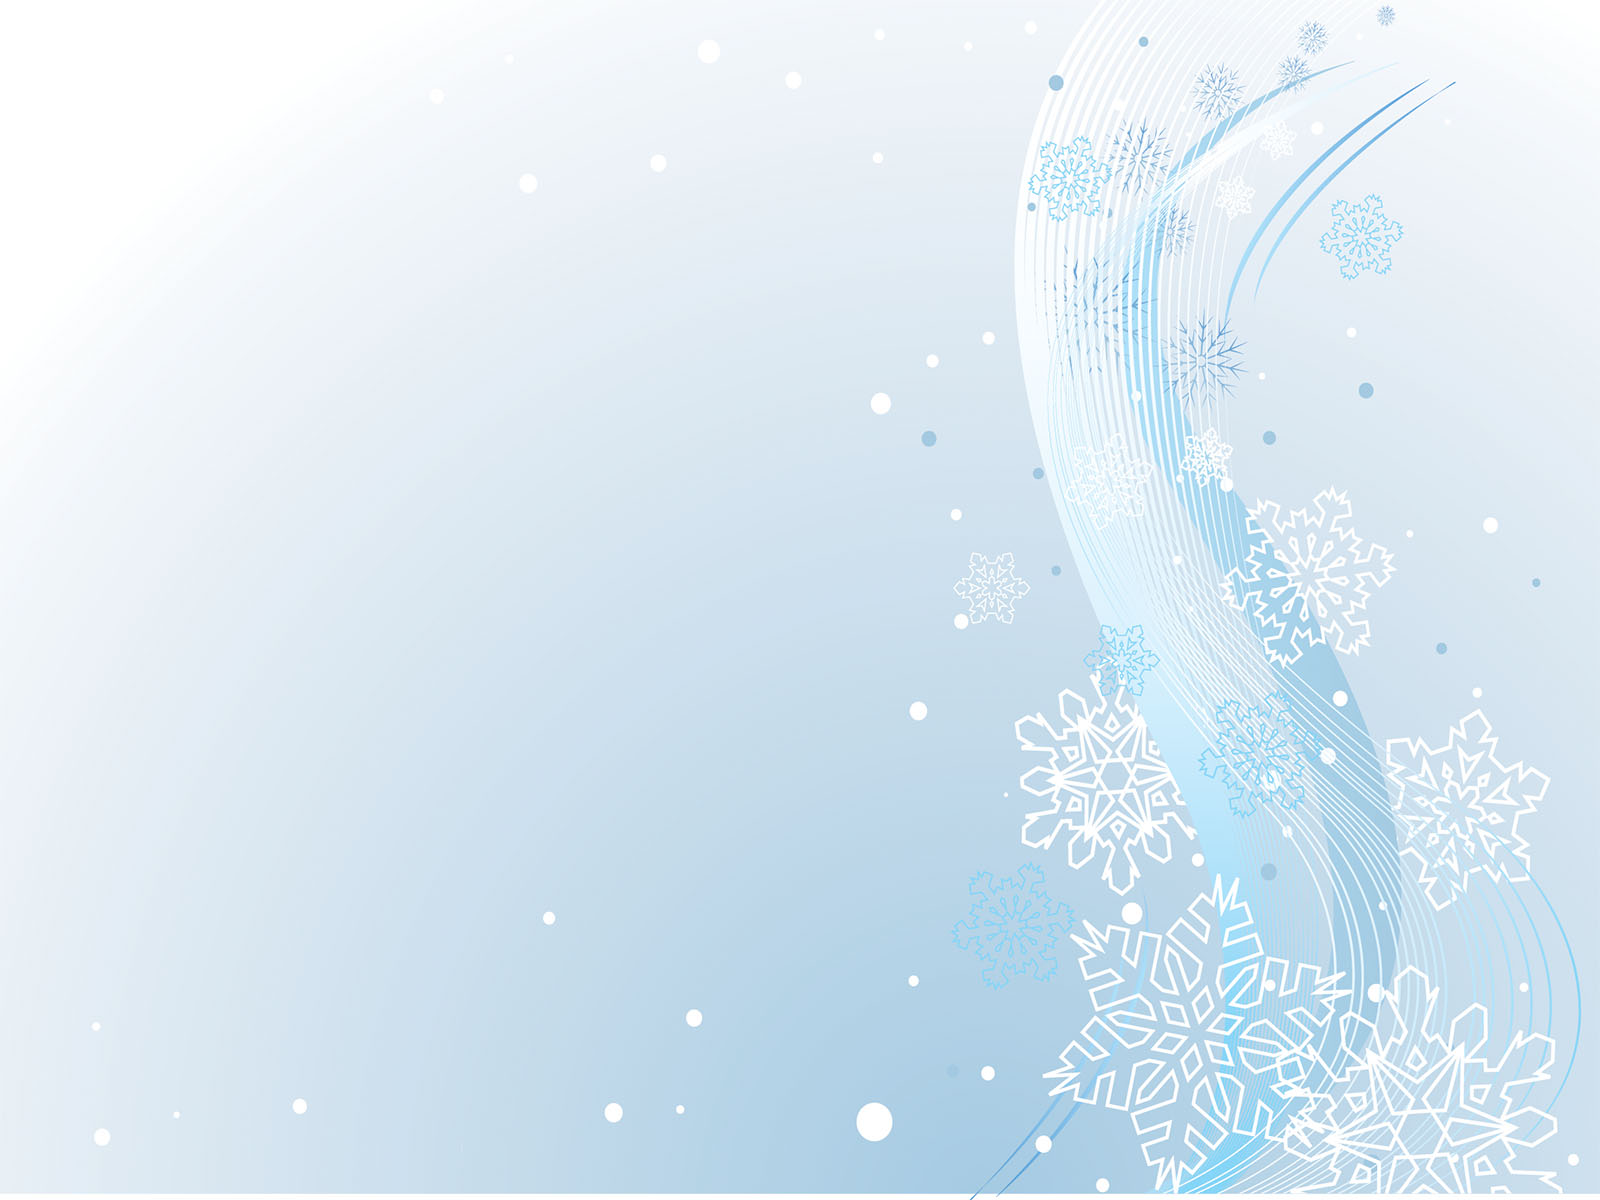 Snowflakes on Light Blue Backgrounds